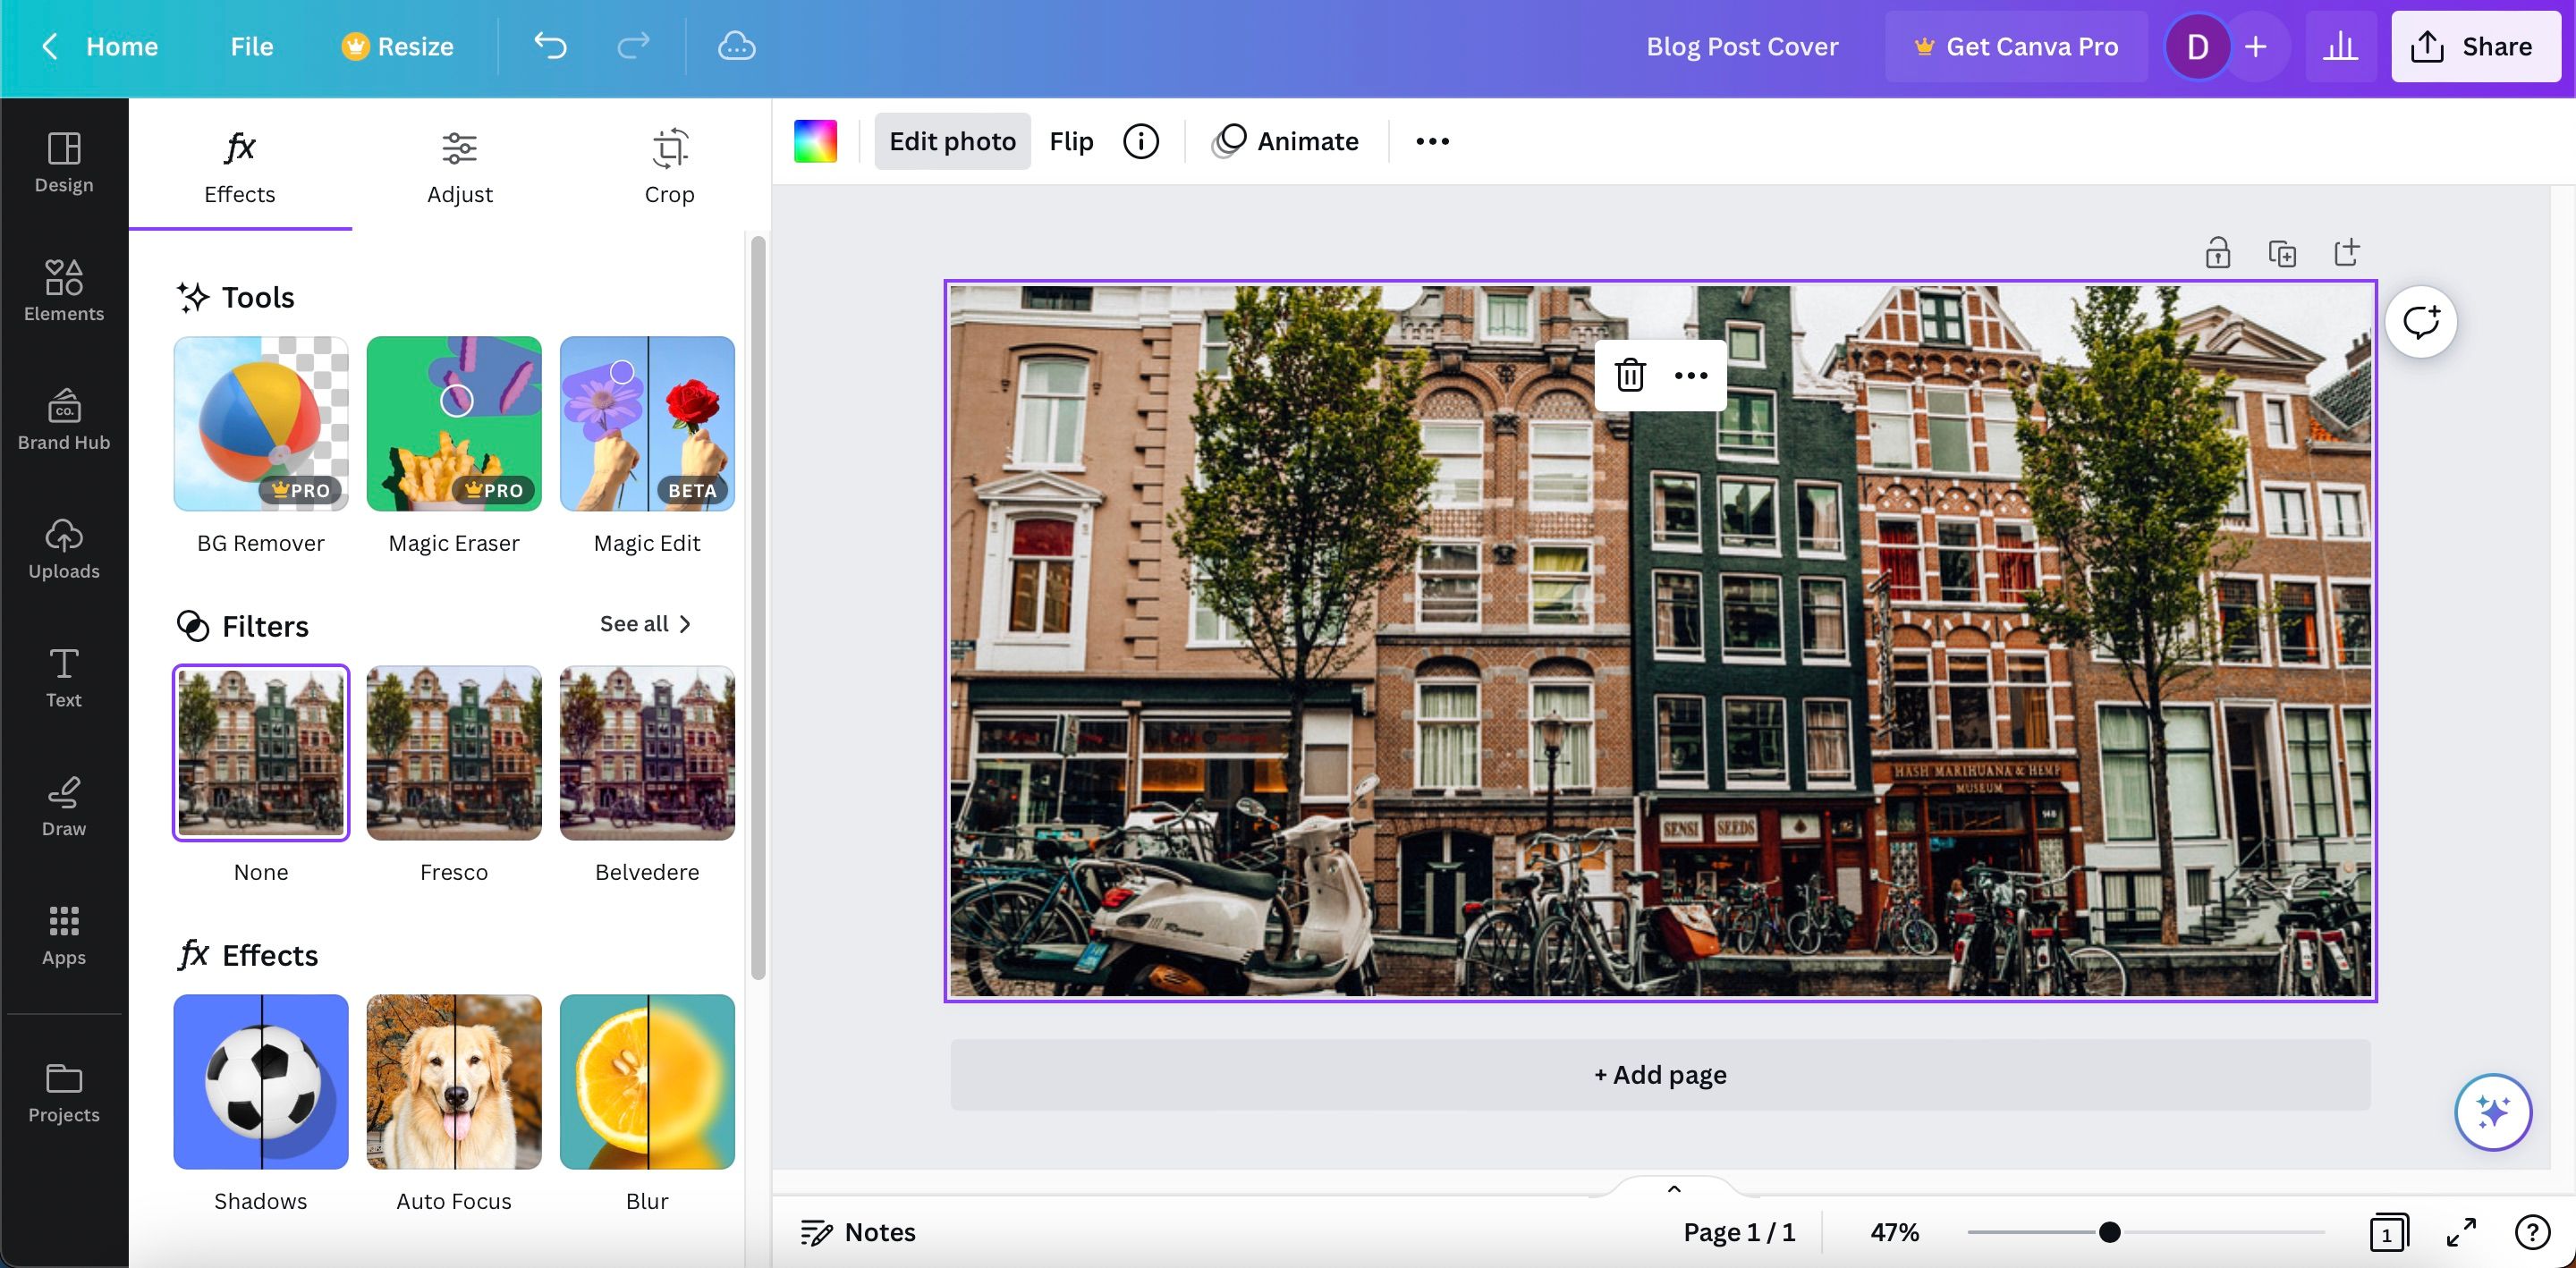 Screenshot showing how to edit photos in Canva